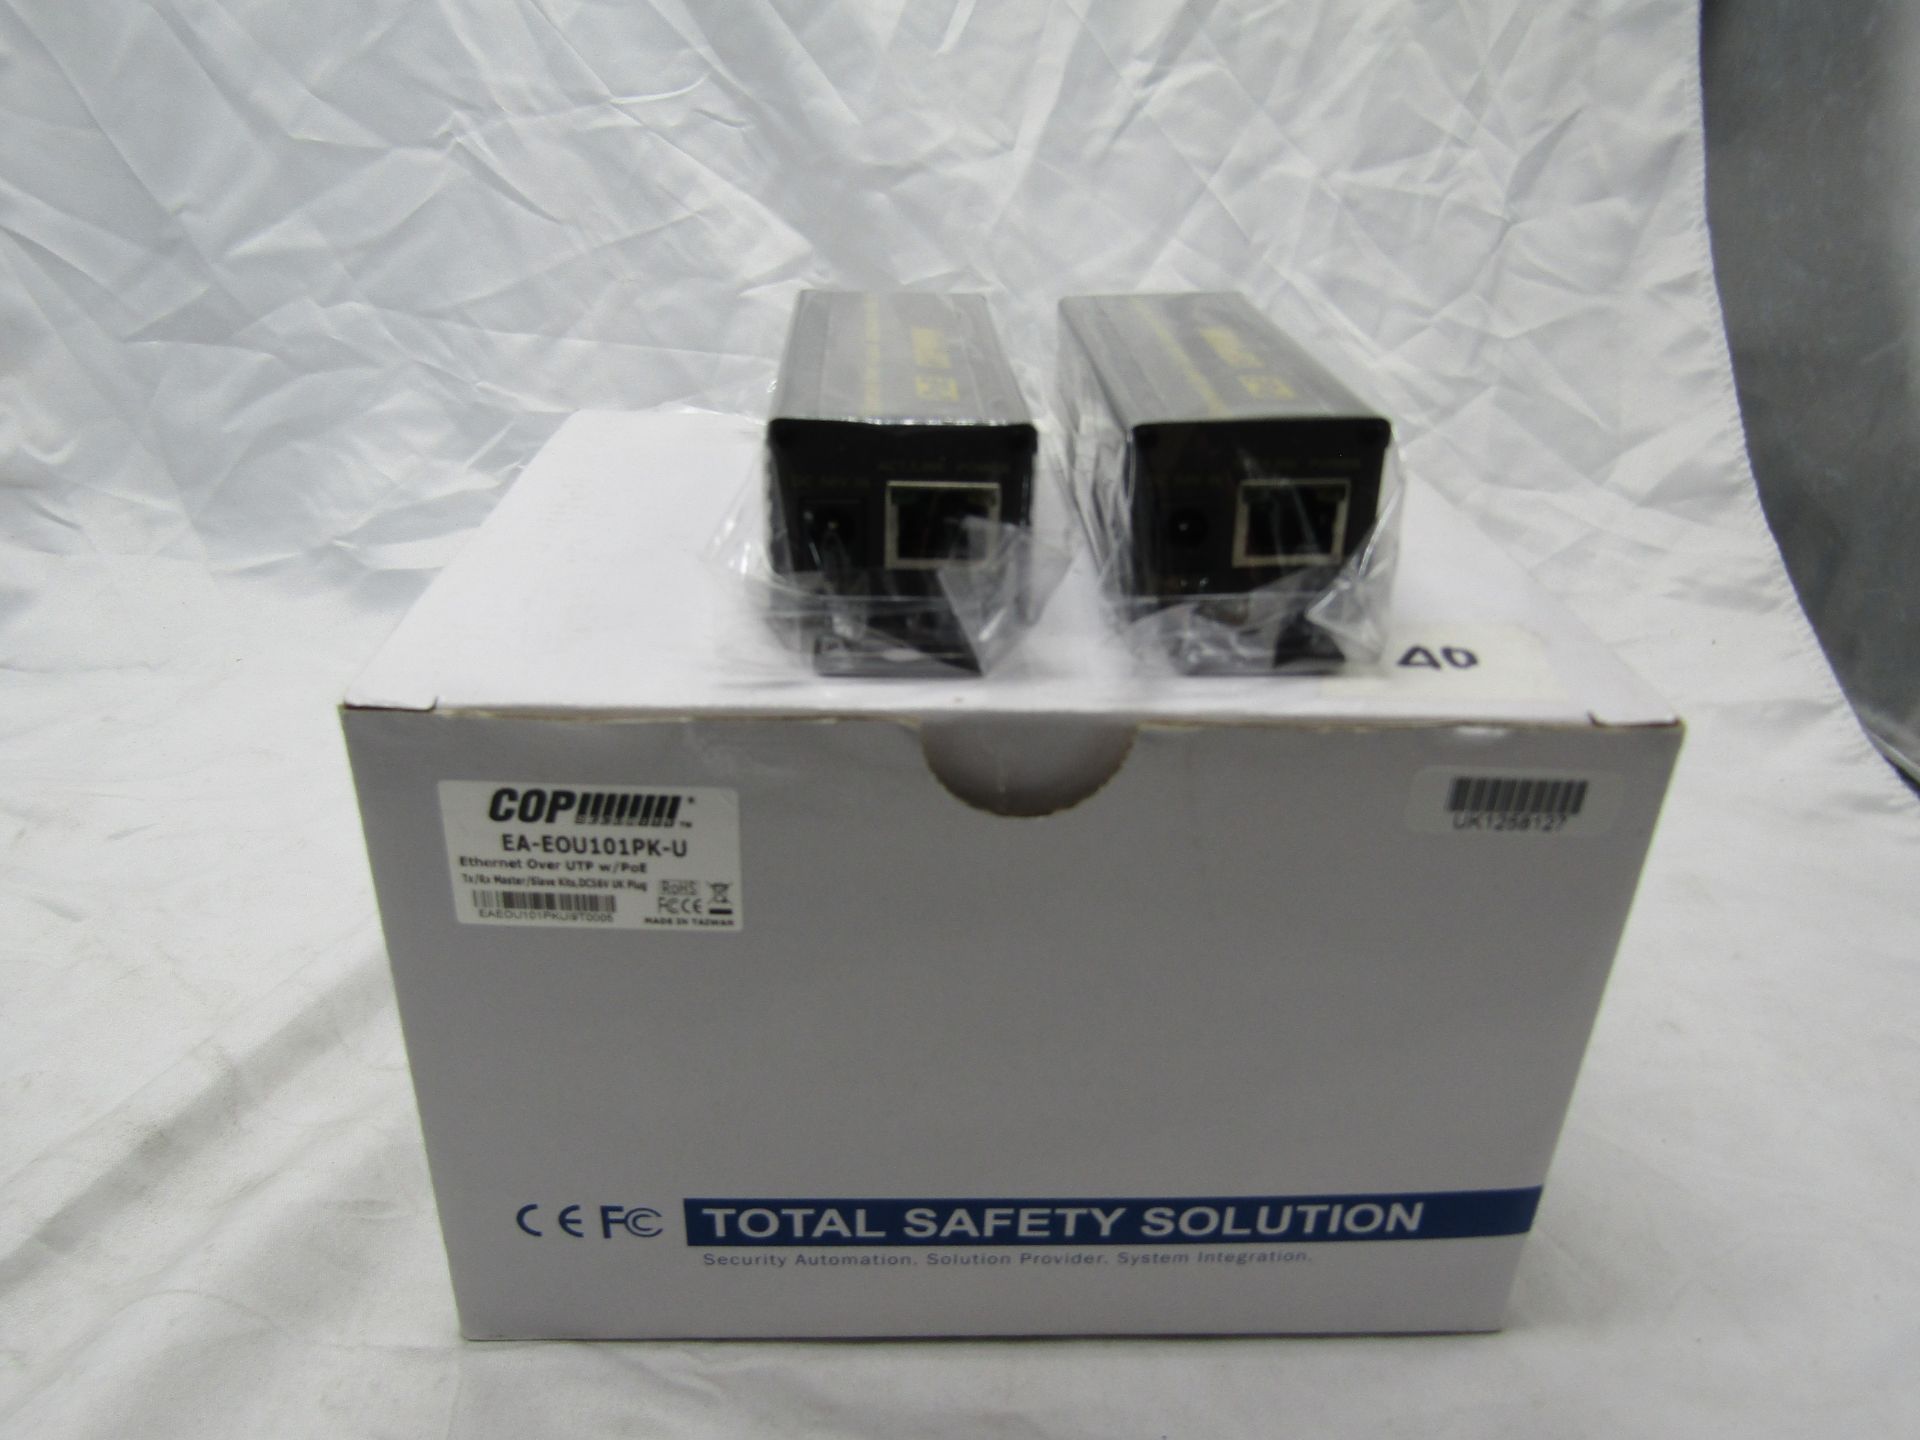 one lot of over 200 items of CCTV and Surveillance equipment, includes DVRs, Cameras, Thermal - Image 69 of 104